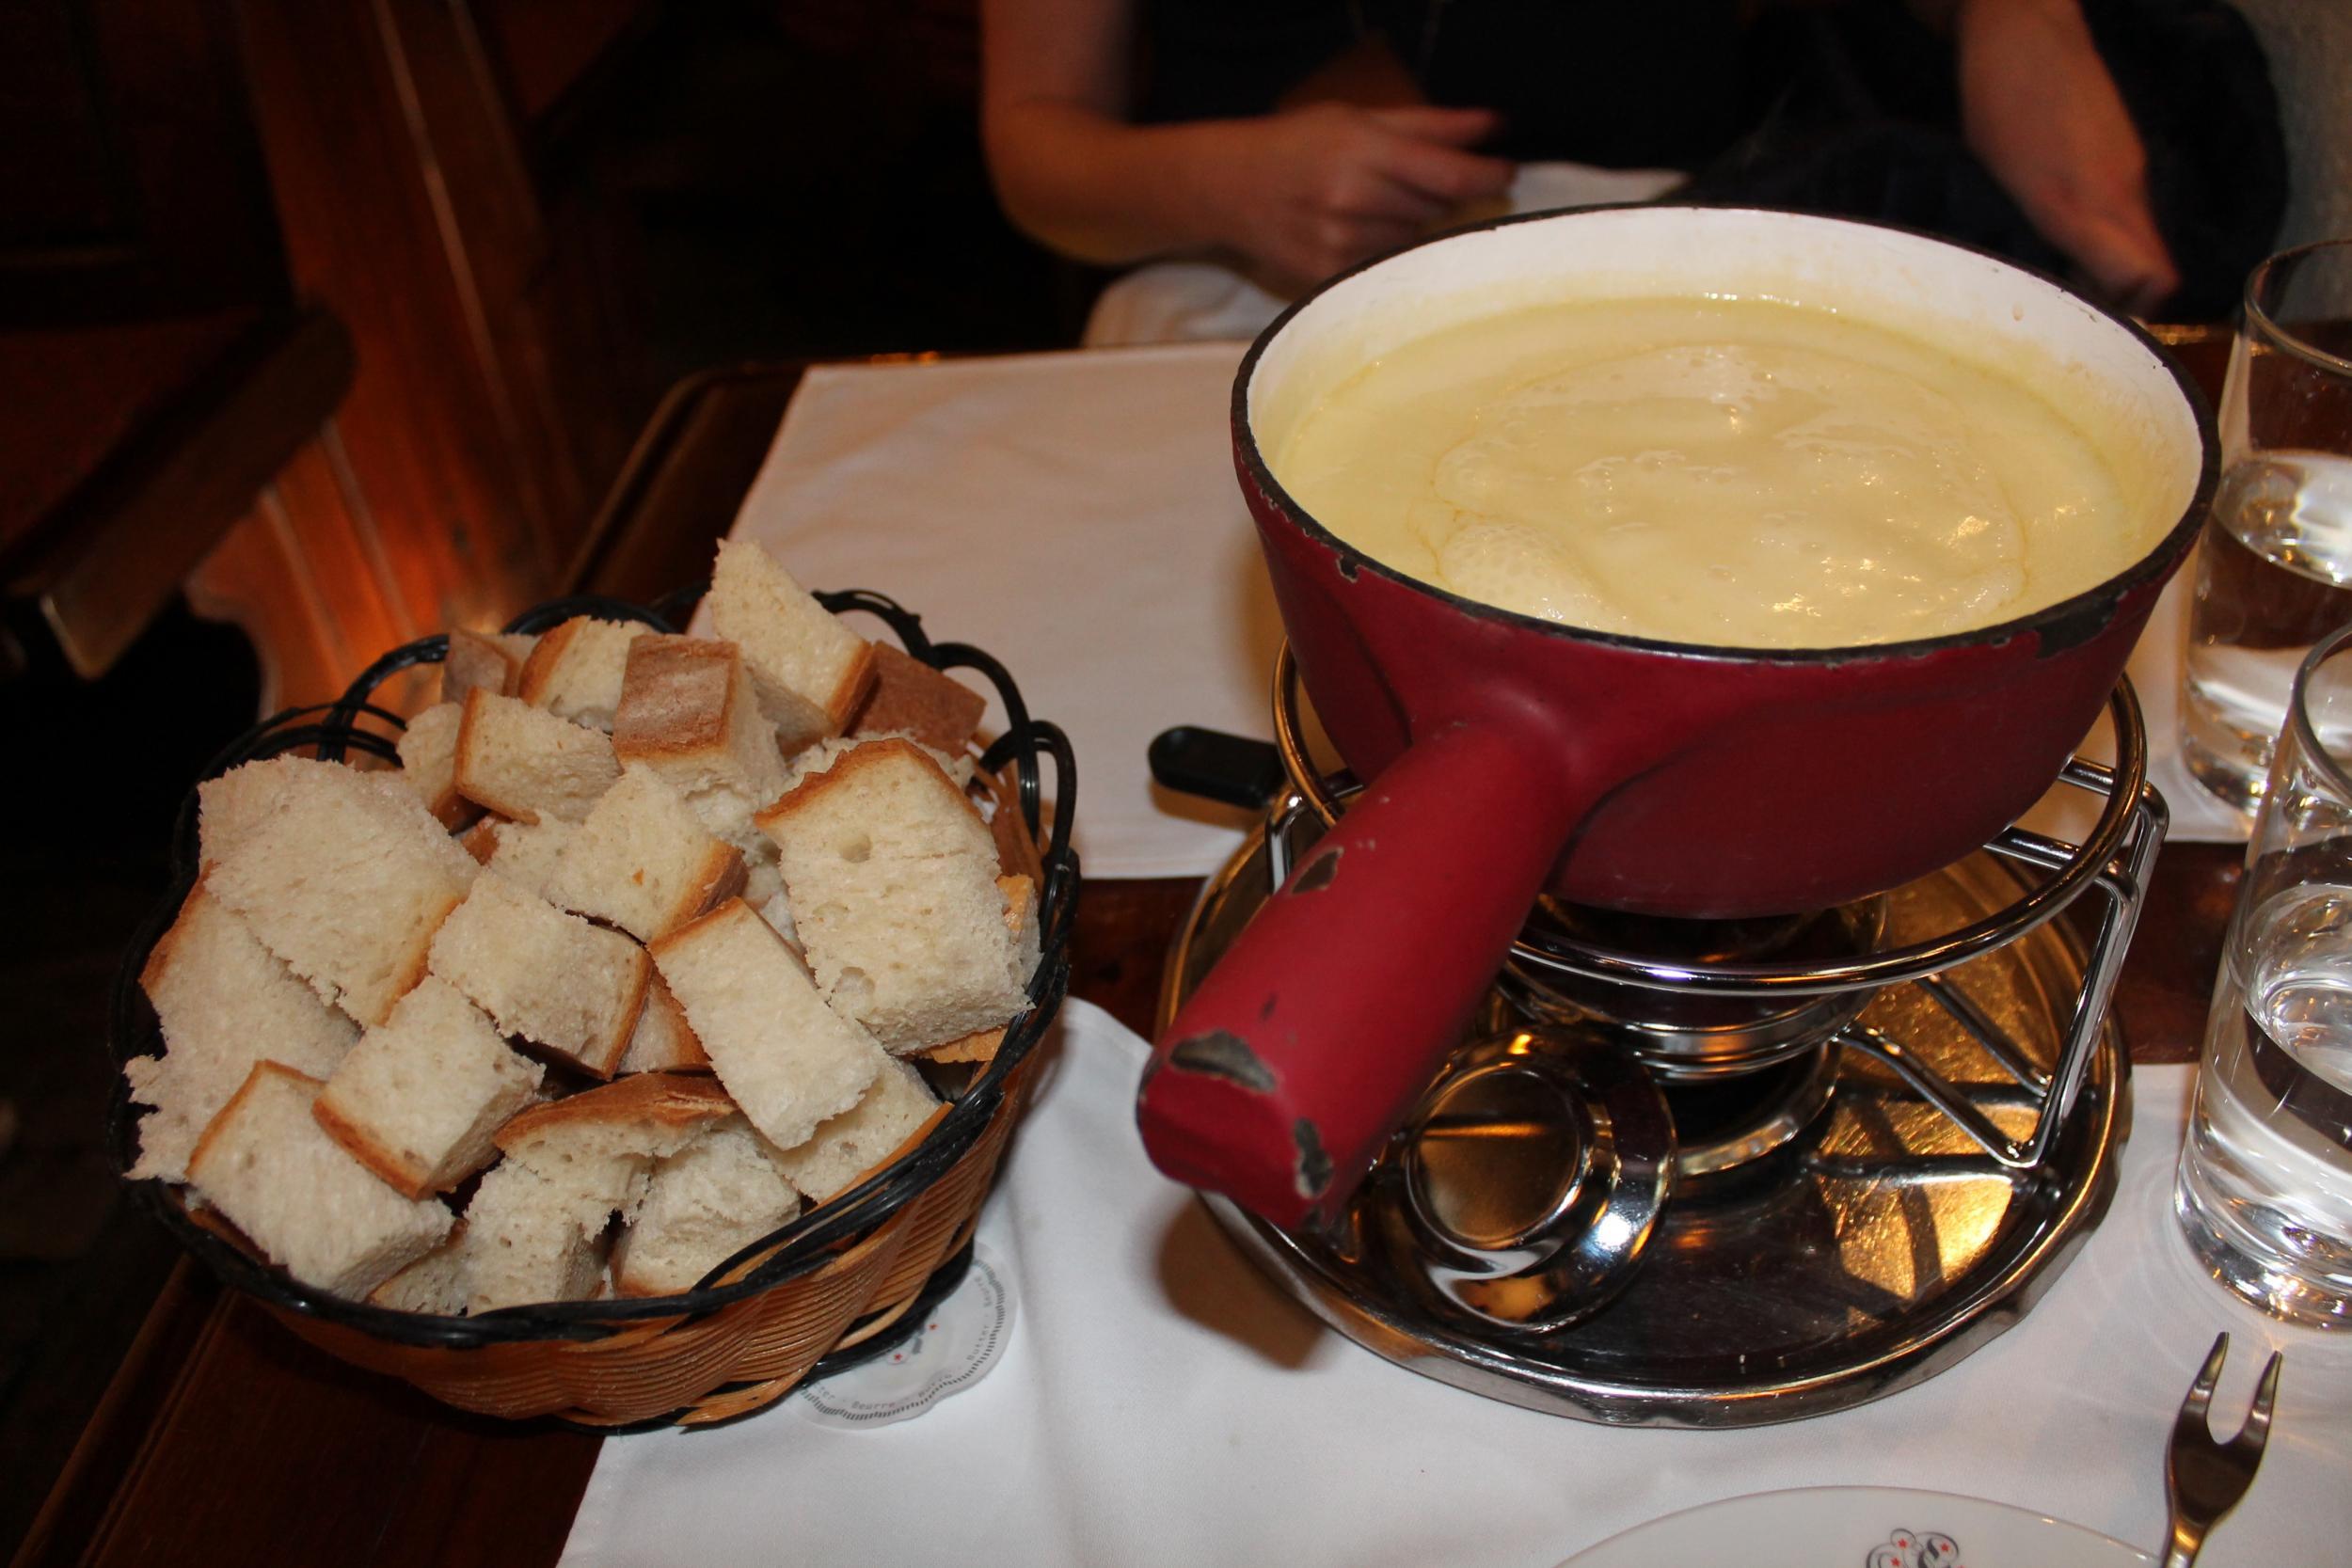 The good thing about Basel: fondue. The bad thing about Basel: the price of fondue